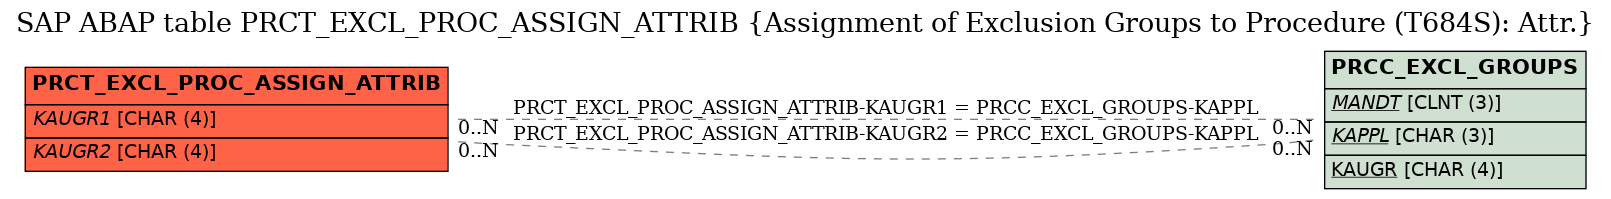 E-R Diagram for table PRCT_EXCL_PROC_ASSIGN_ATTRIB (Assignment of Exclusion Groups to Procedure (T684S): Attr.)